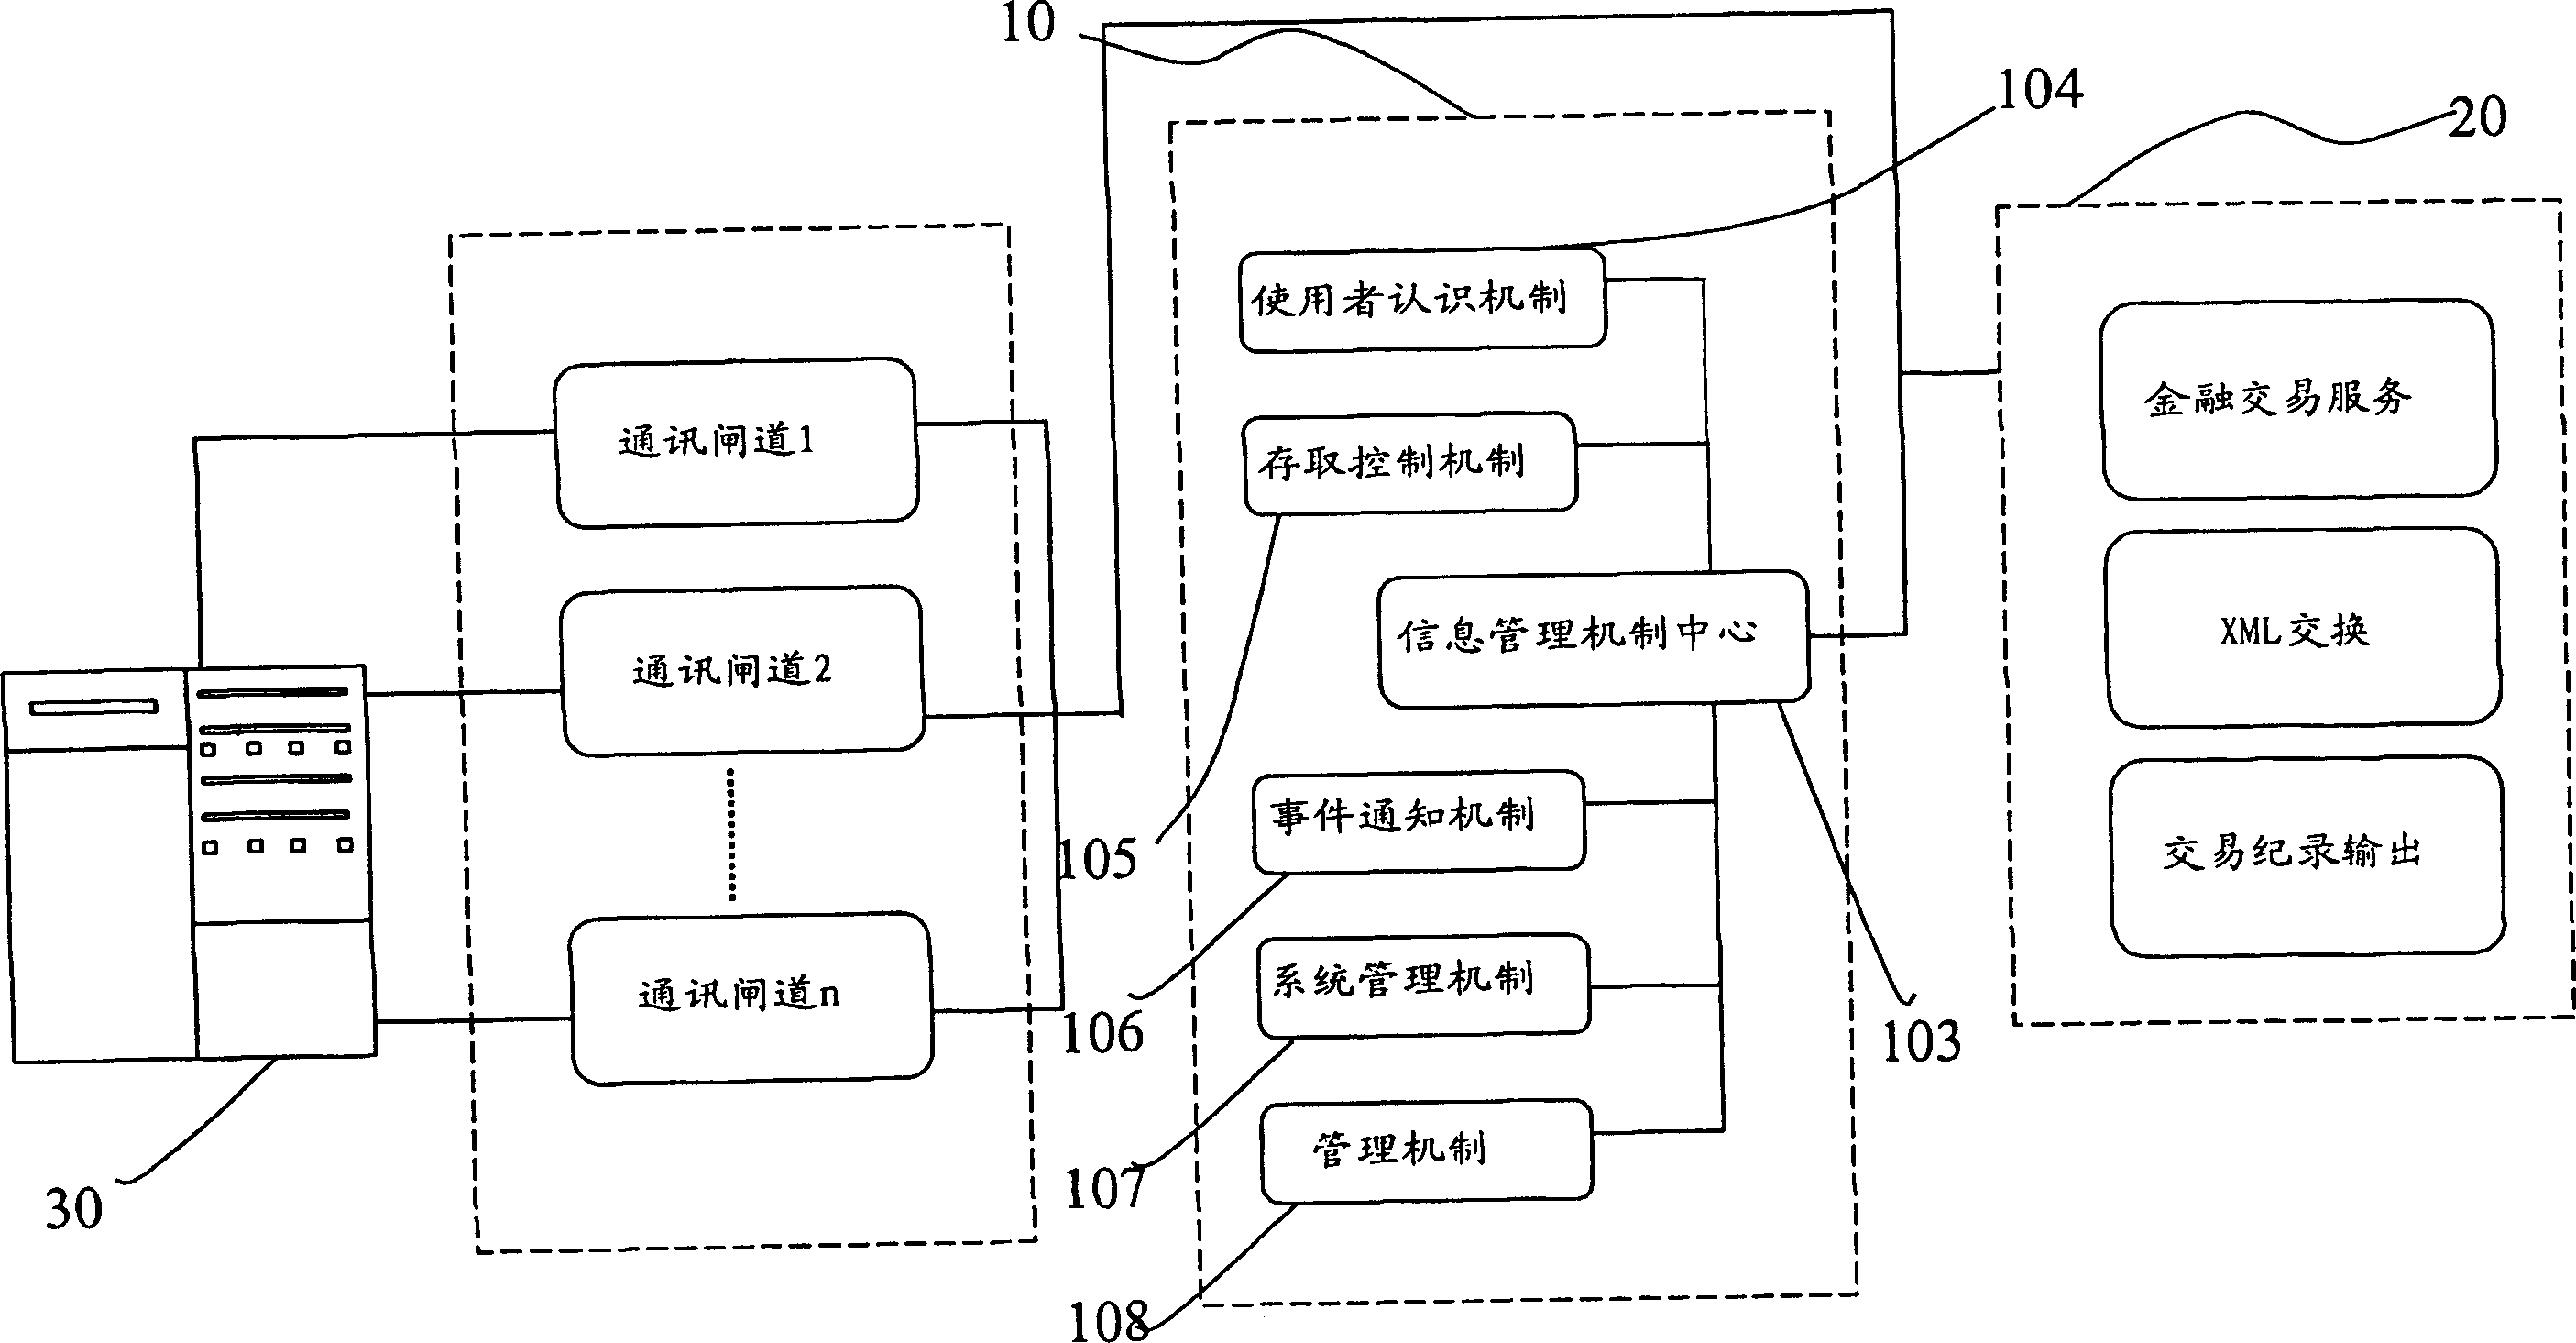 System and method of treating finance data and related metal trade system